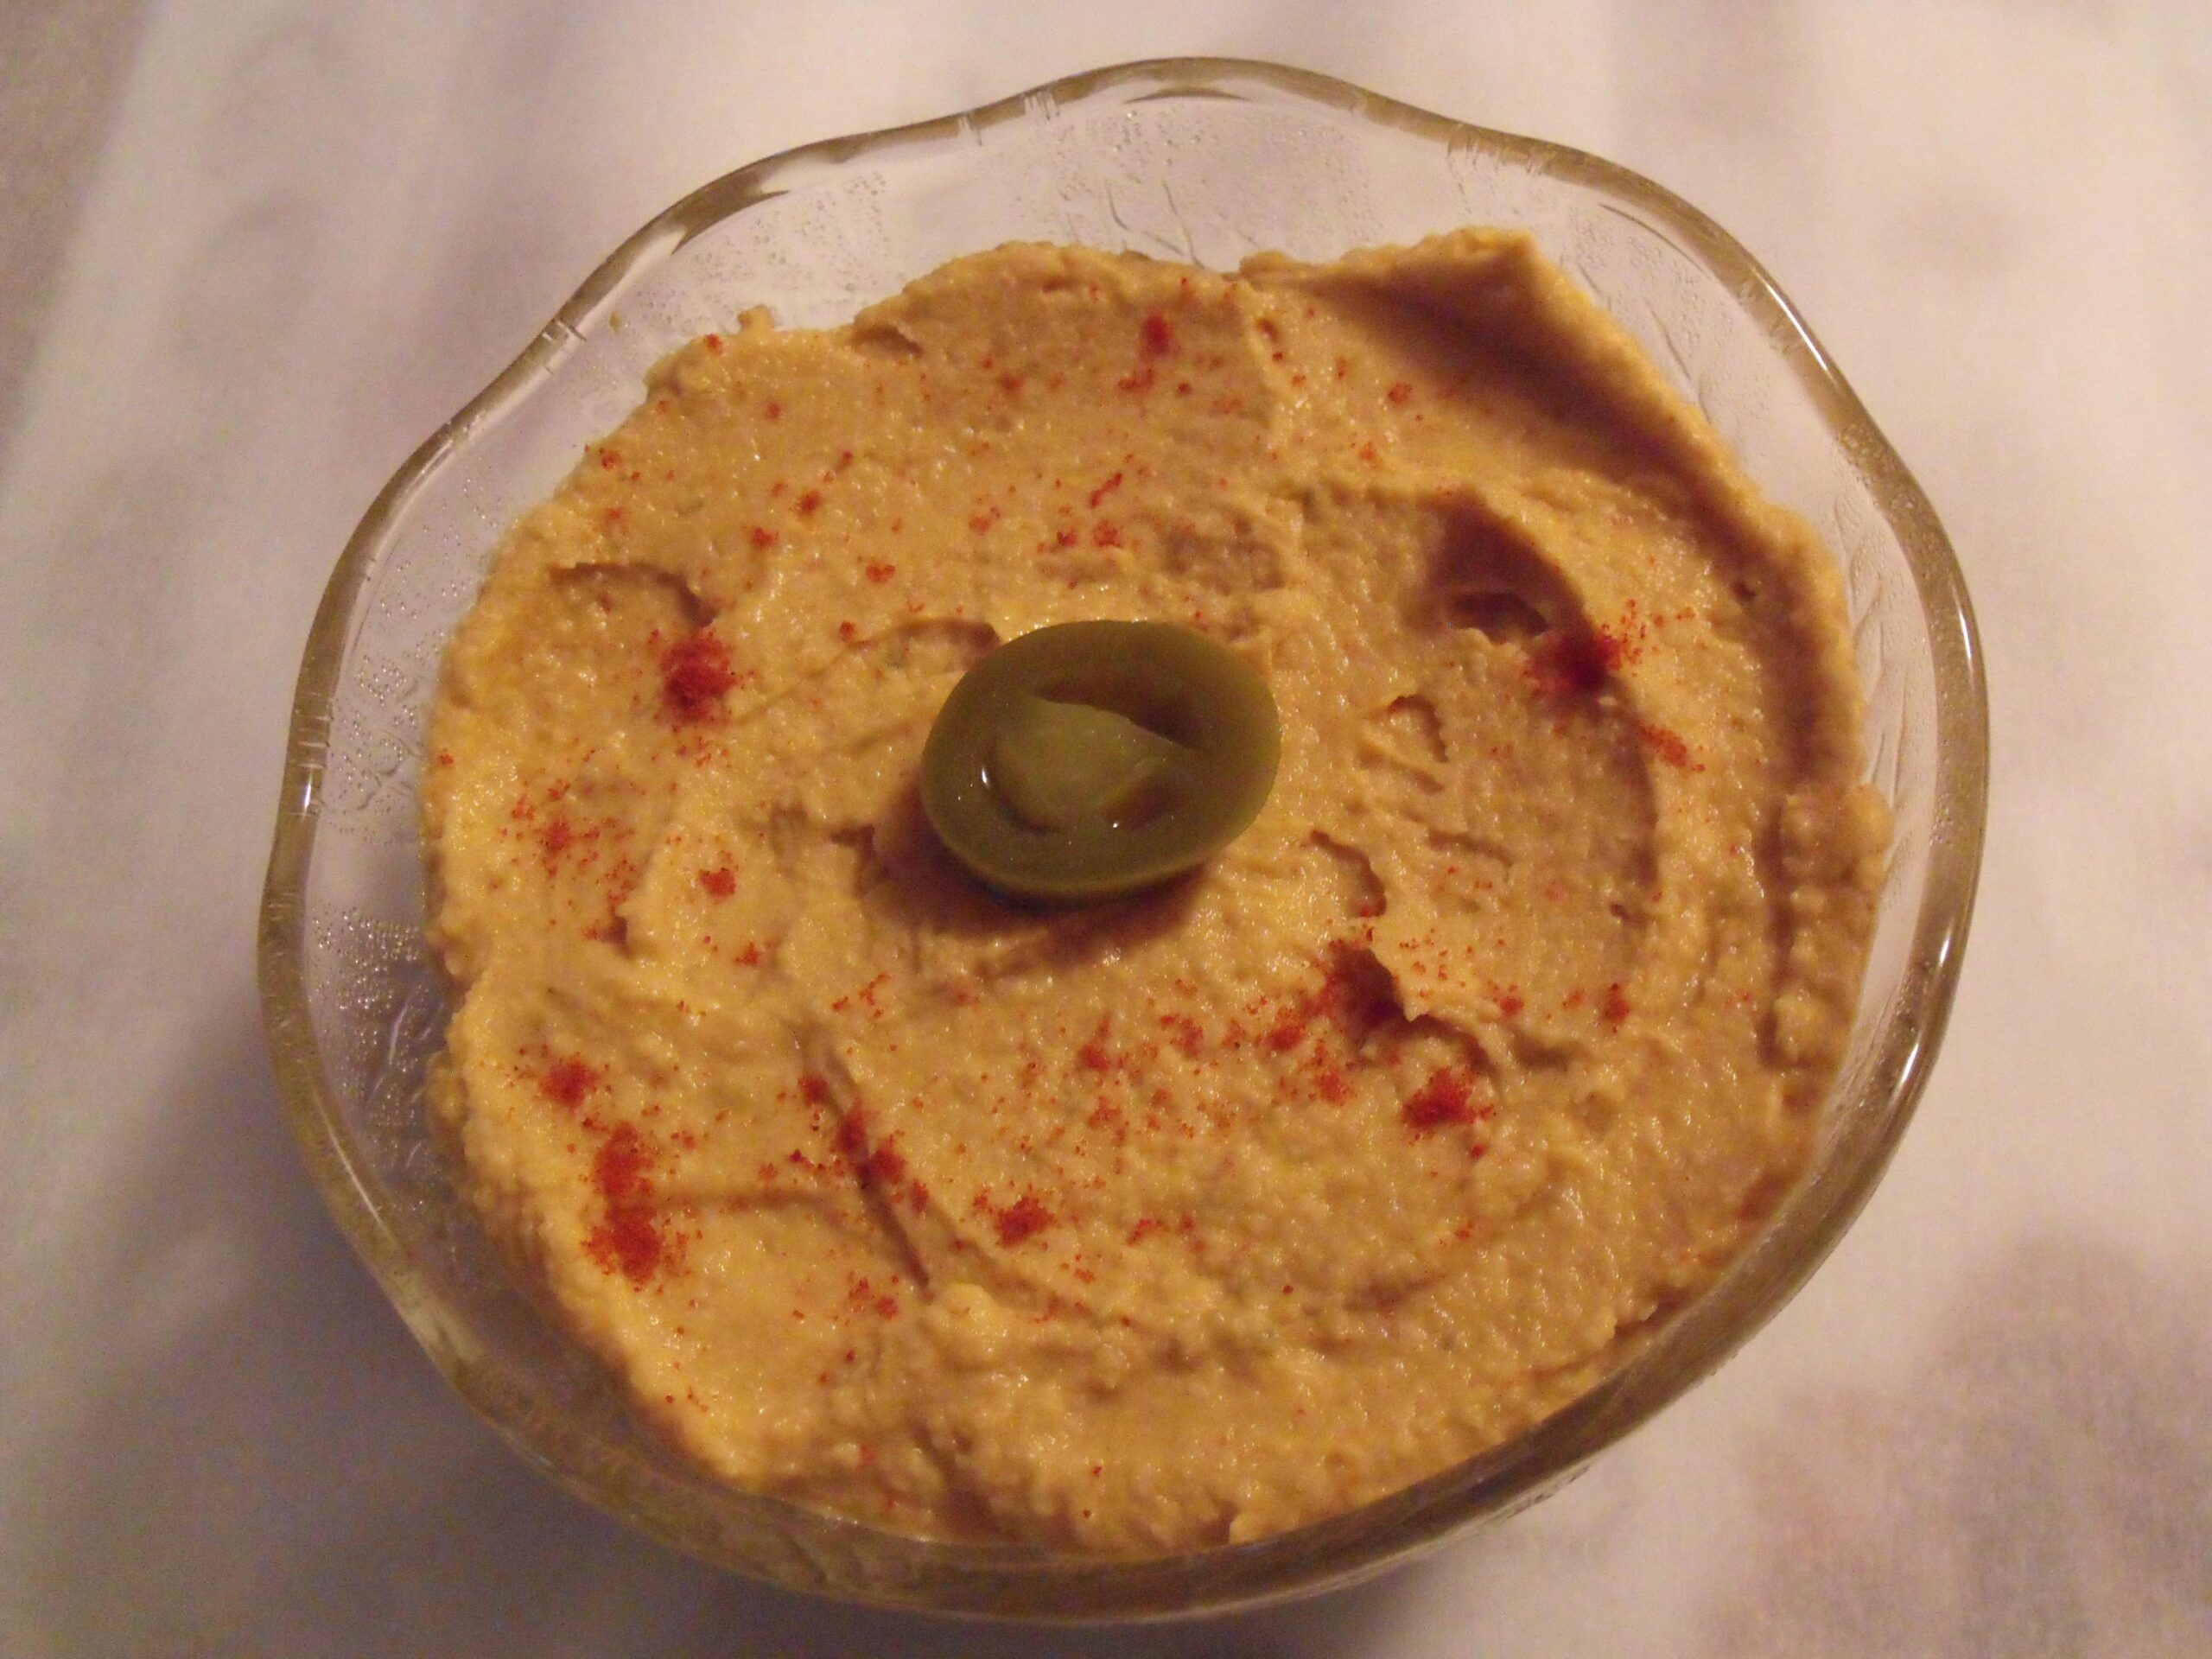  A mouth-watering dip you won't forget!